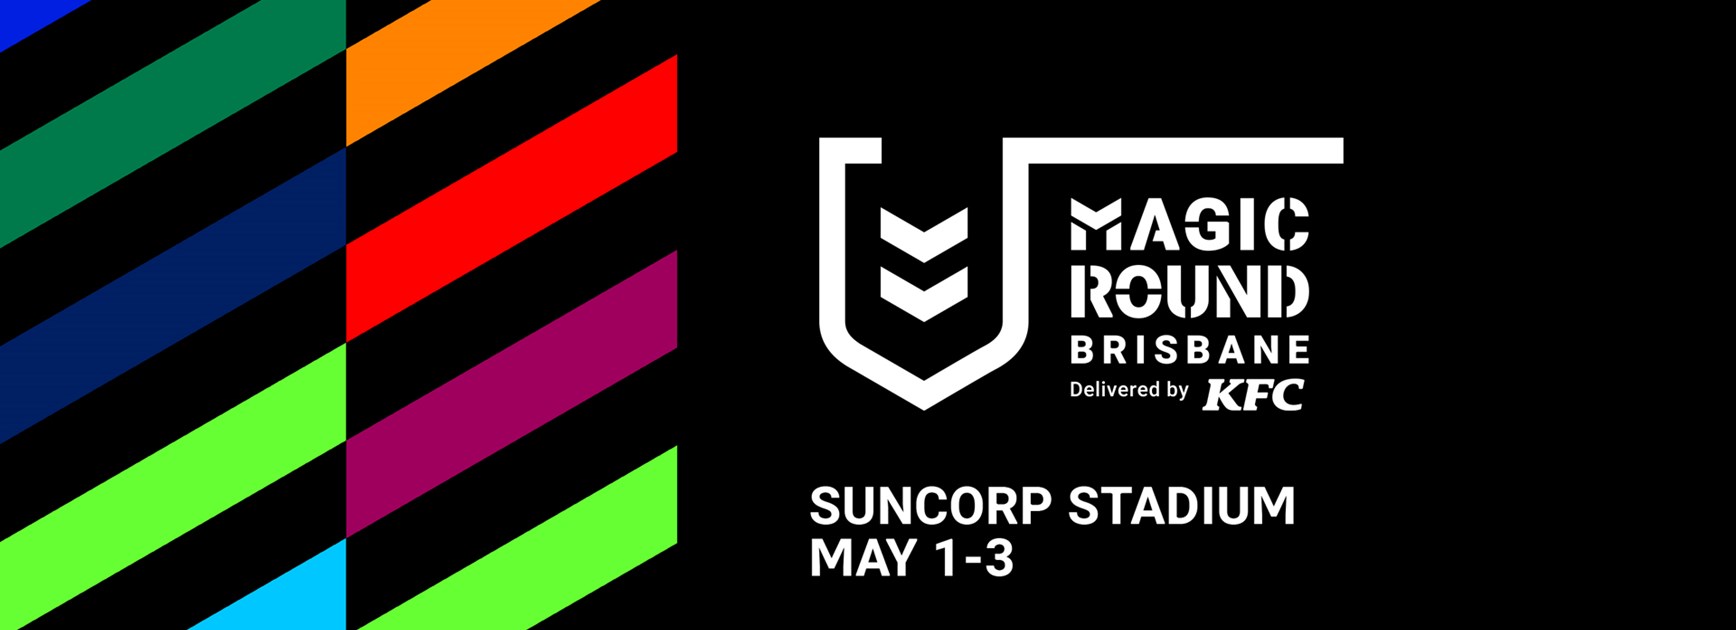 Tickets on sale for Magic Round 2020